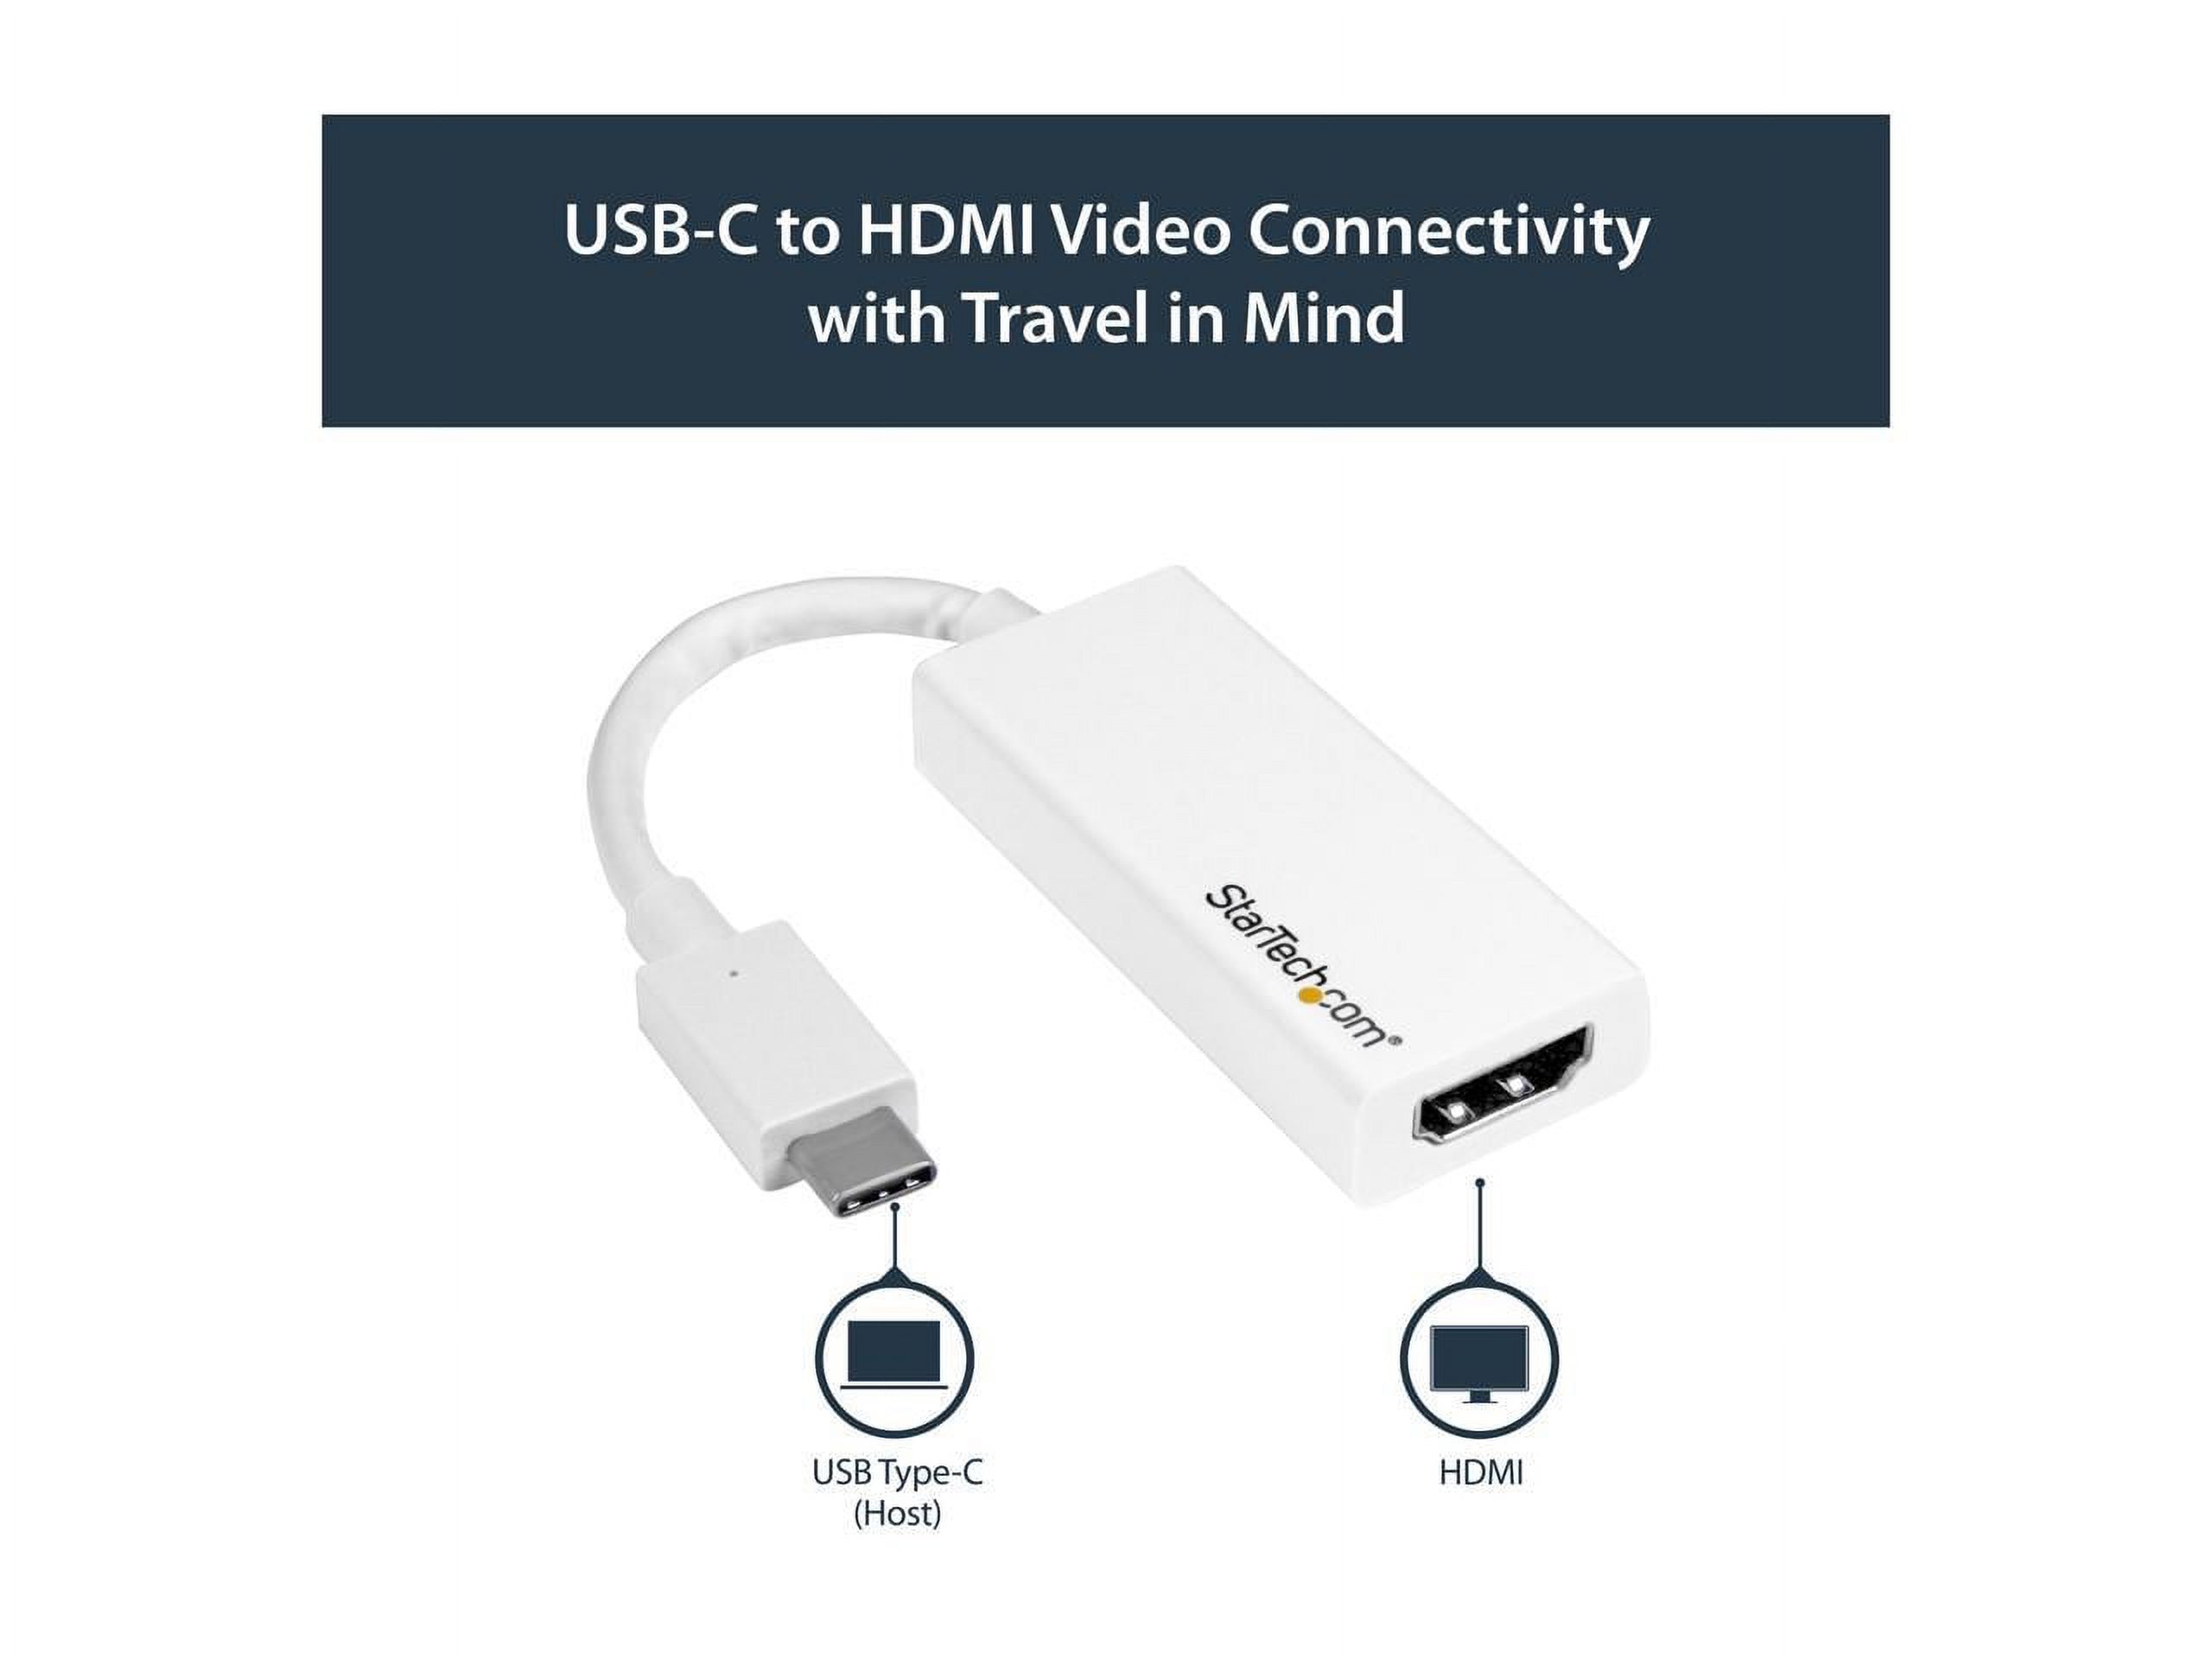 StarTech.com CDP2HDW USB-C to HDMI Adapter - 4K 30Hz - USB 3.1 Type-C to HDMI Adapter - USB C to HDMI Dongle - Monitor Adapter - White (CDP2HDW) - image 5 of 5